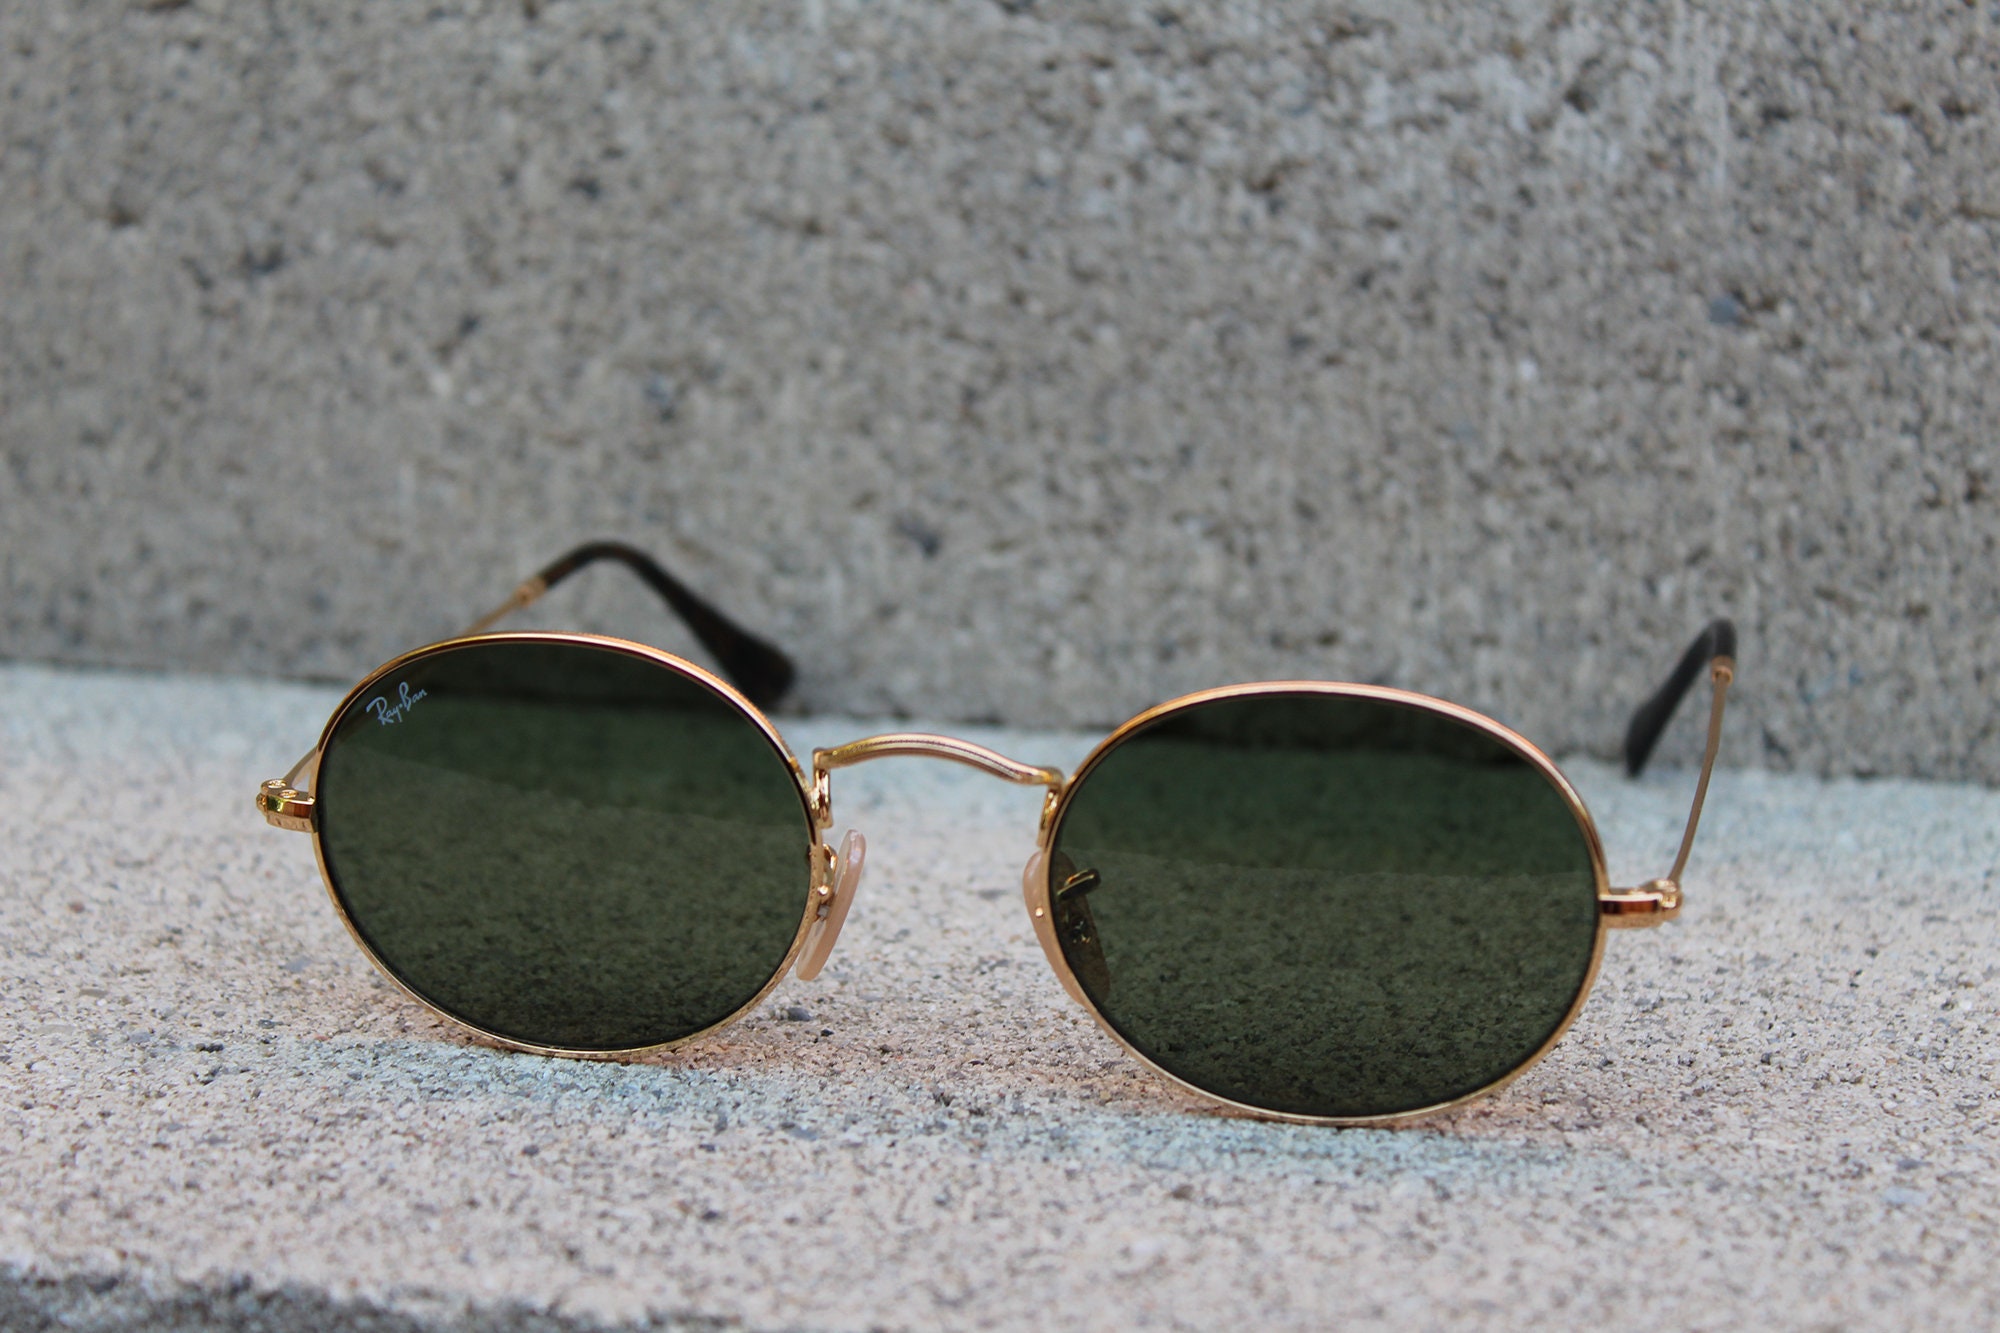 Gold Oval Lens Ray-ban Sunglasses Rb3547 001 - Etsy Finland